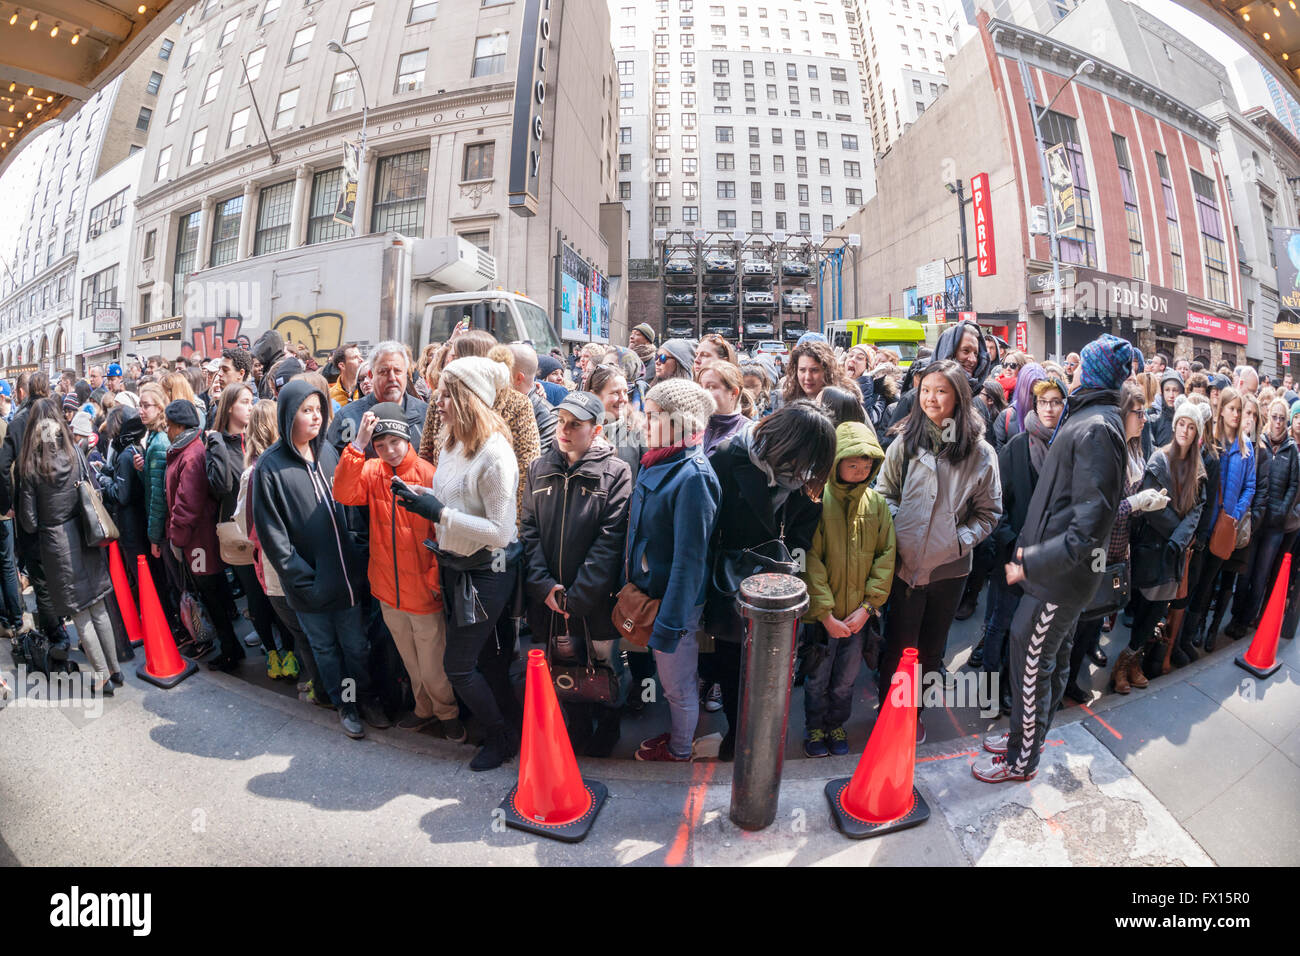 Hundreds of theater lovers in front of the Richard Rodgers Theatre in Times Square in New York on Wednesday, April 6, 2016 for a chance to win one of 22 tickets in the #Ham4Ham lottery for seats for the Broadway blockbuster 'Hamilton'. The $10 live lottery takes place in front of the theater for the Wednesday matinee performance while for the rest of the week's performances the lottery is online. (© Richard B. Levine) Stock Photo